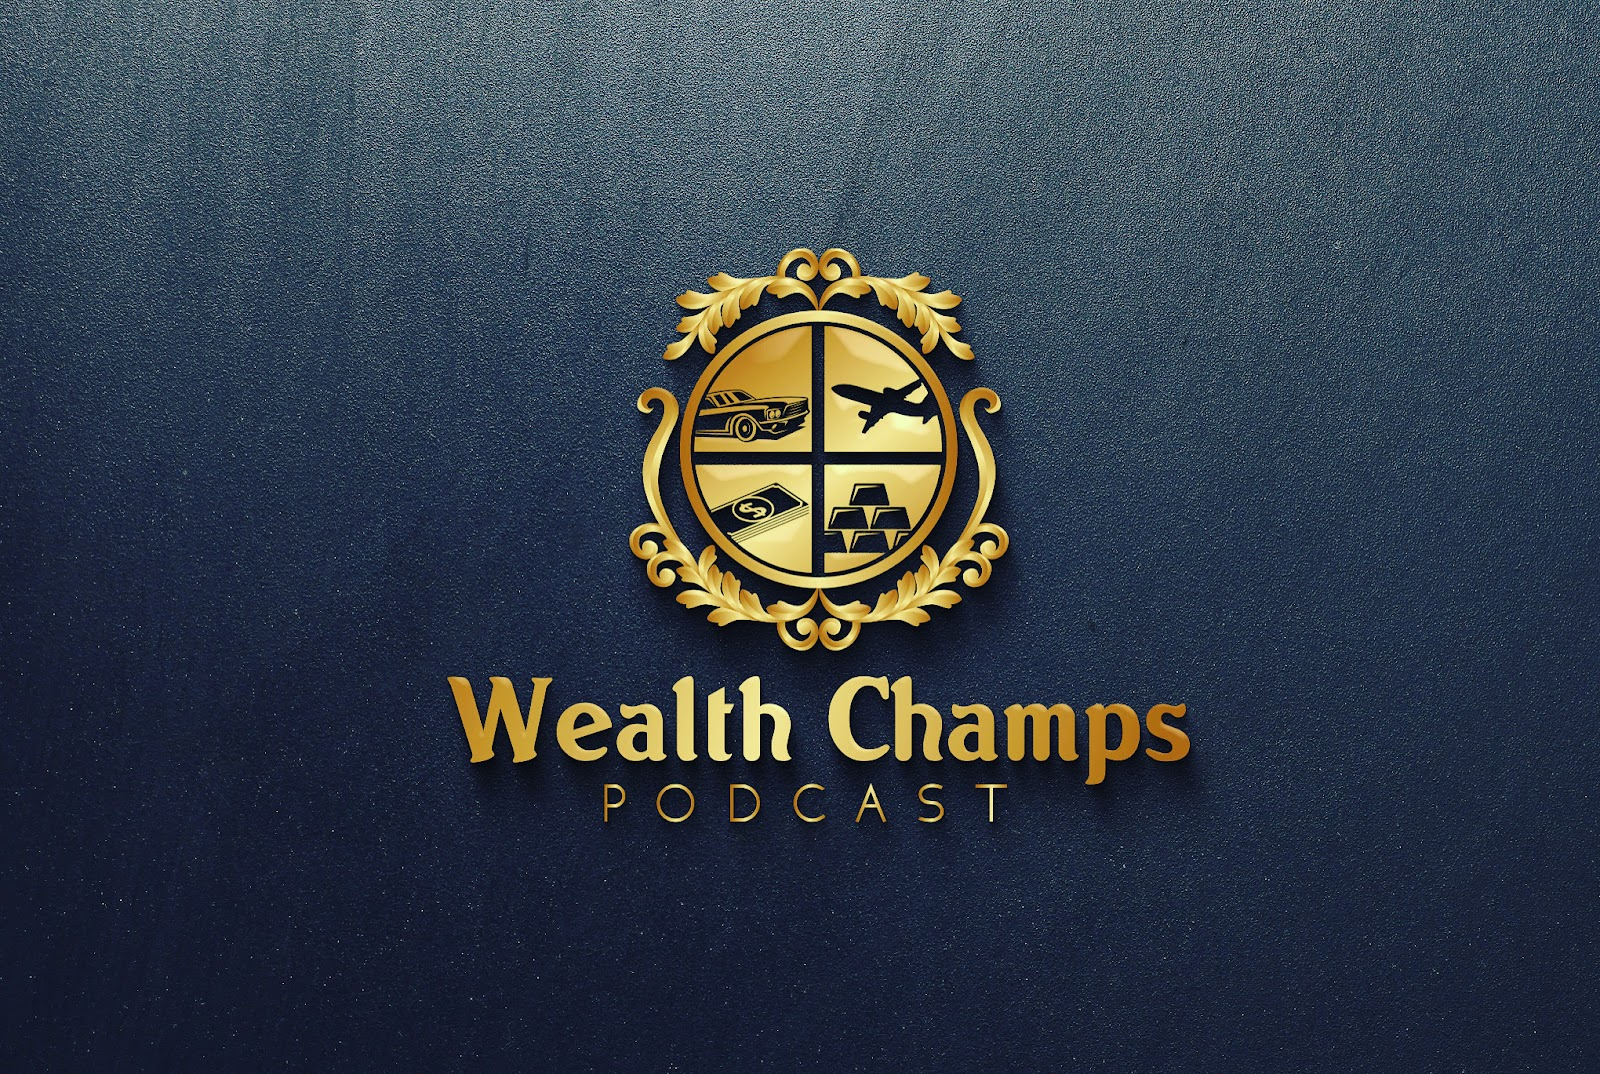 Wealth Champs Podcast, Thursday, June 8, 2023, Press release picture